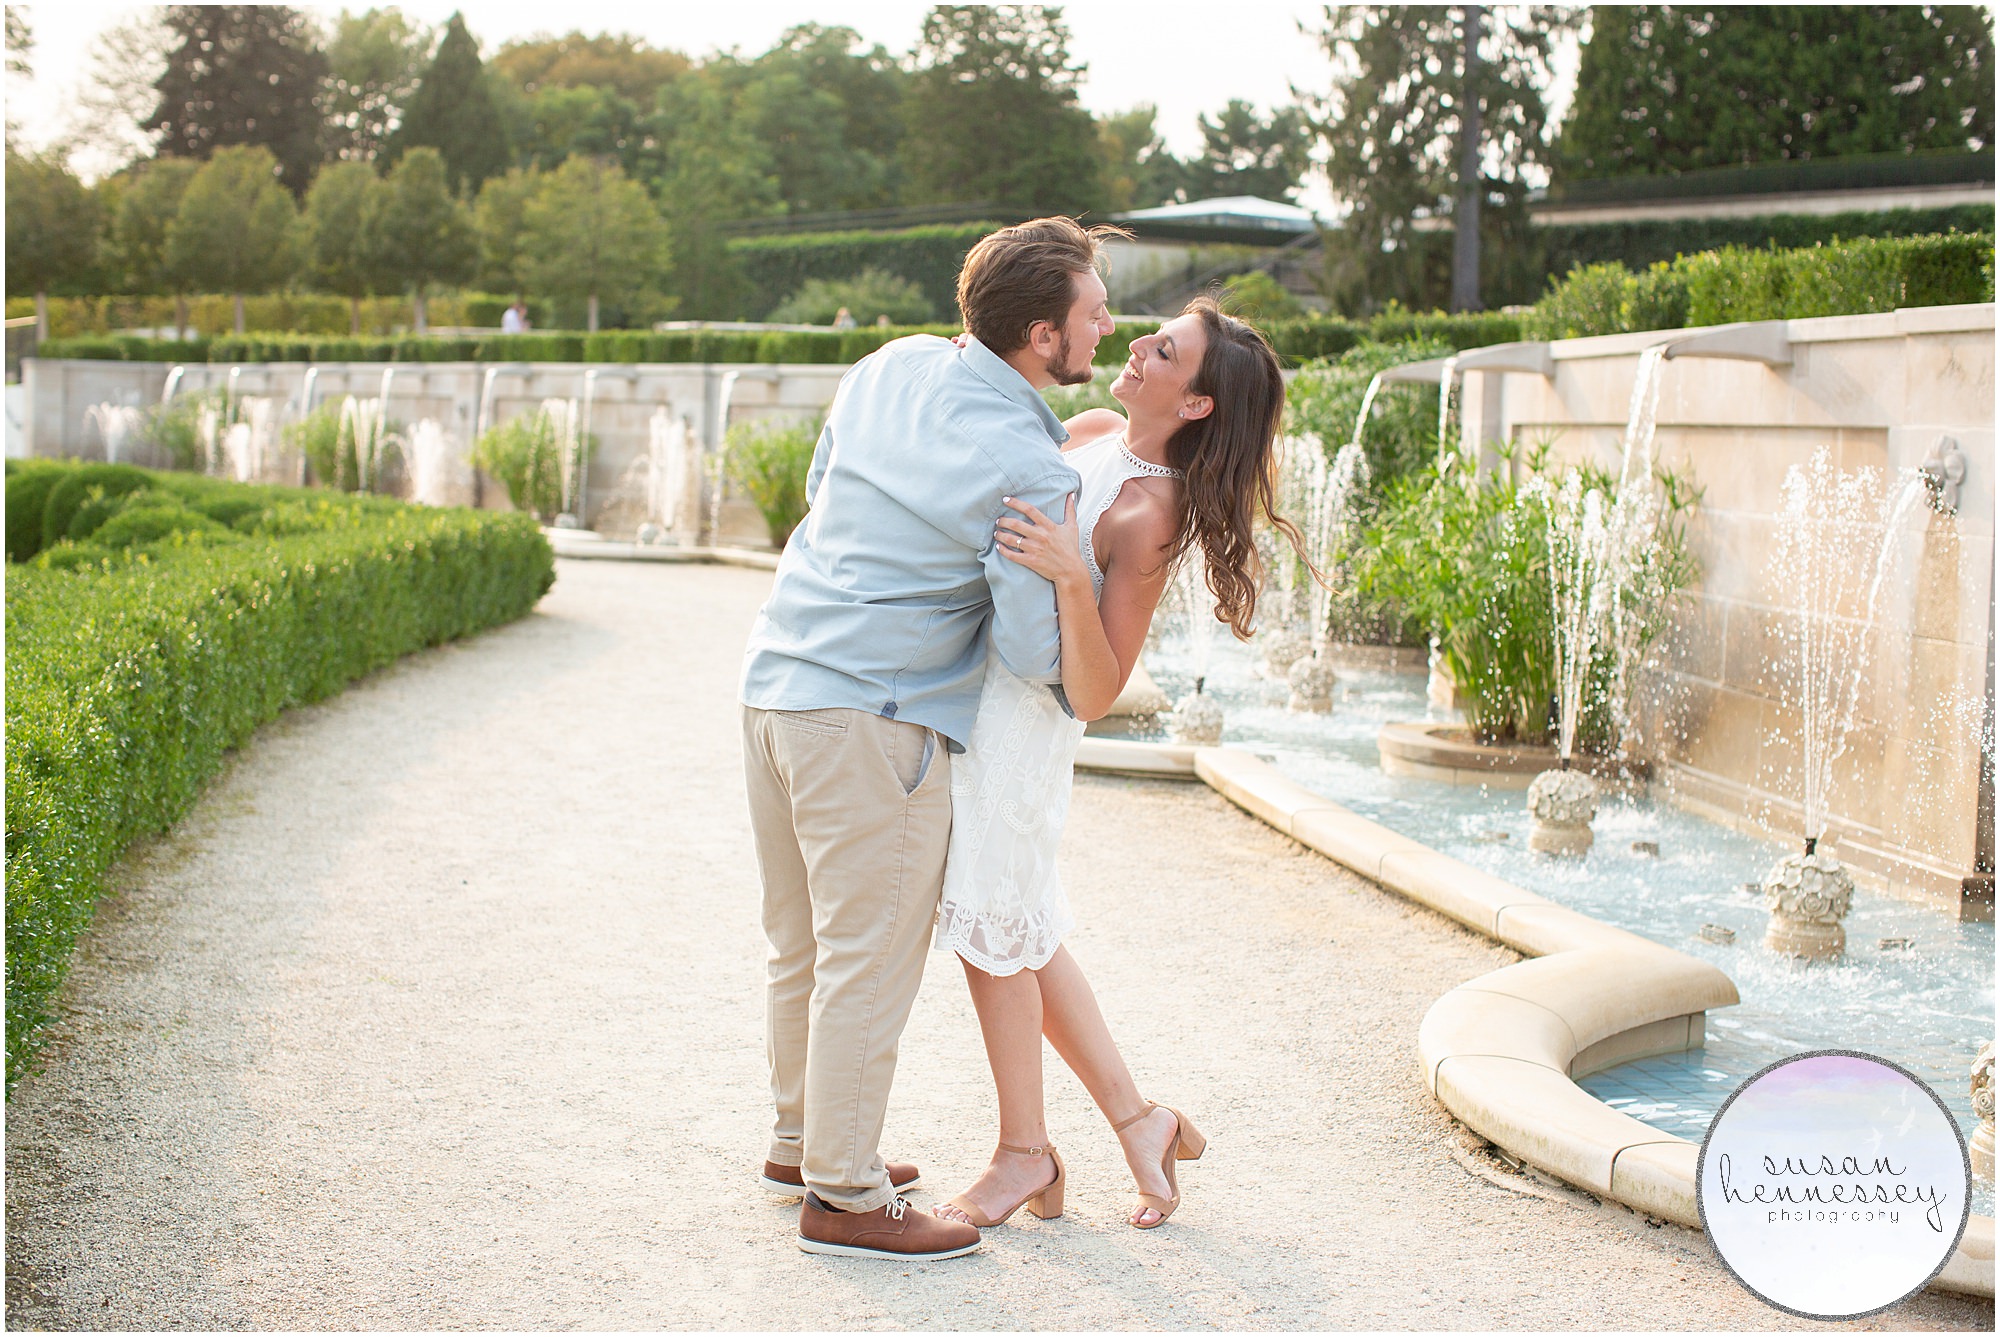 A summer Engagement Session at Longwood Gardens